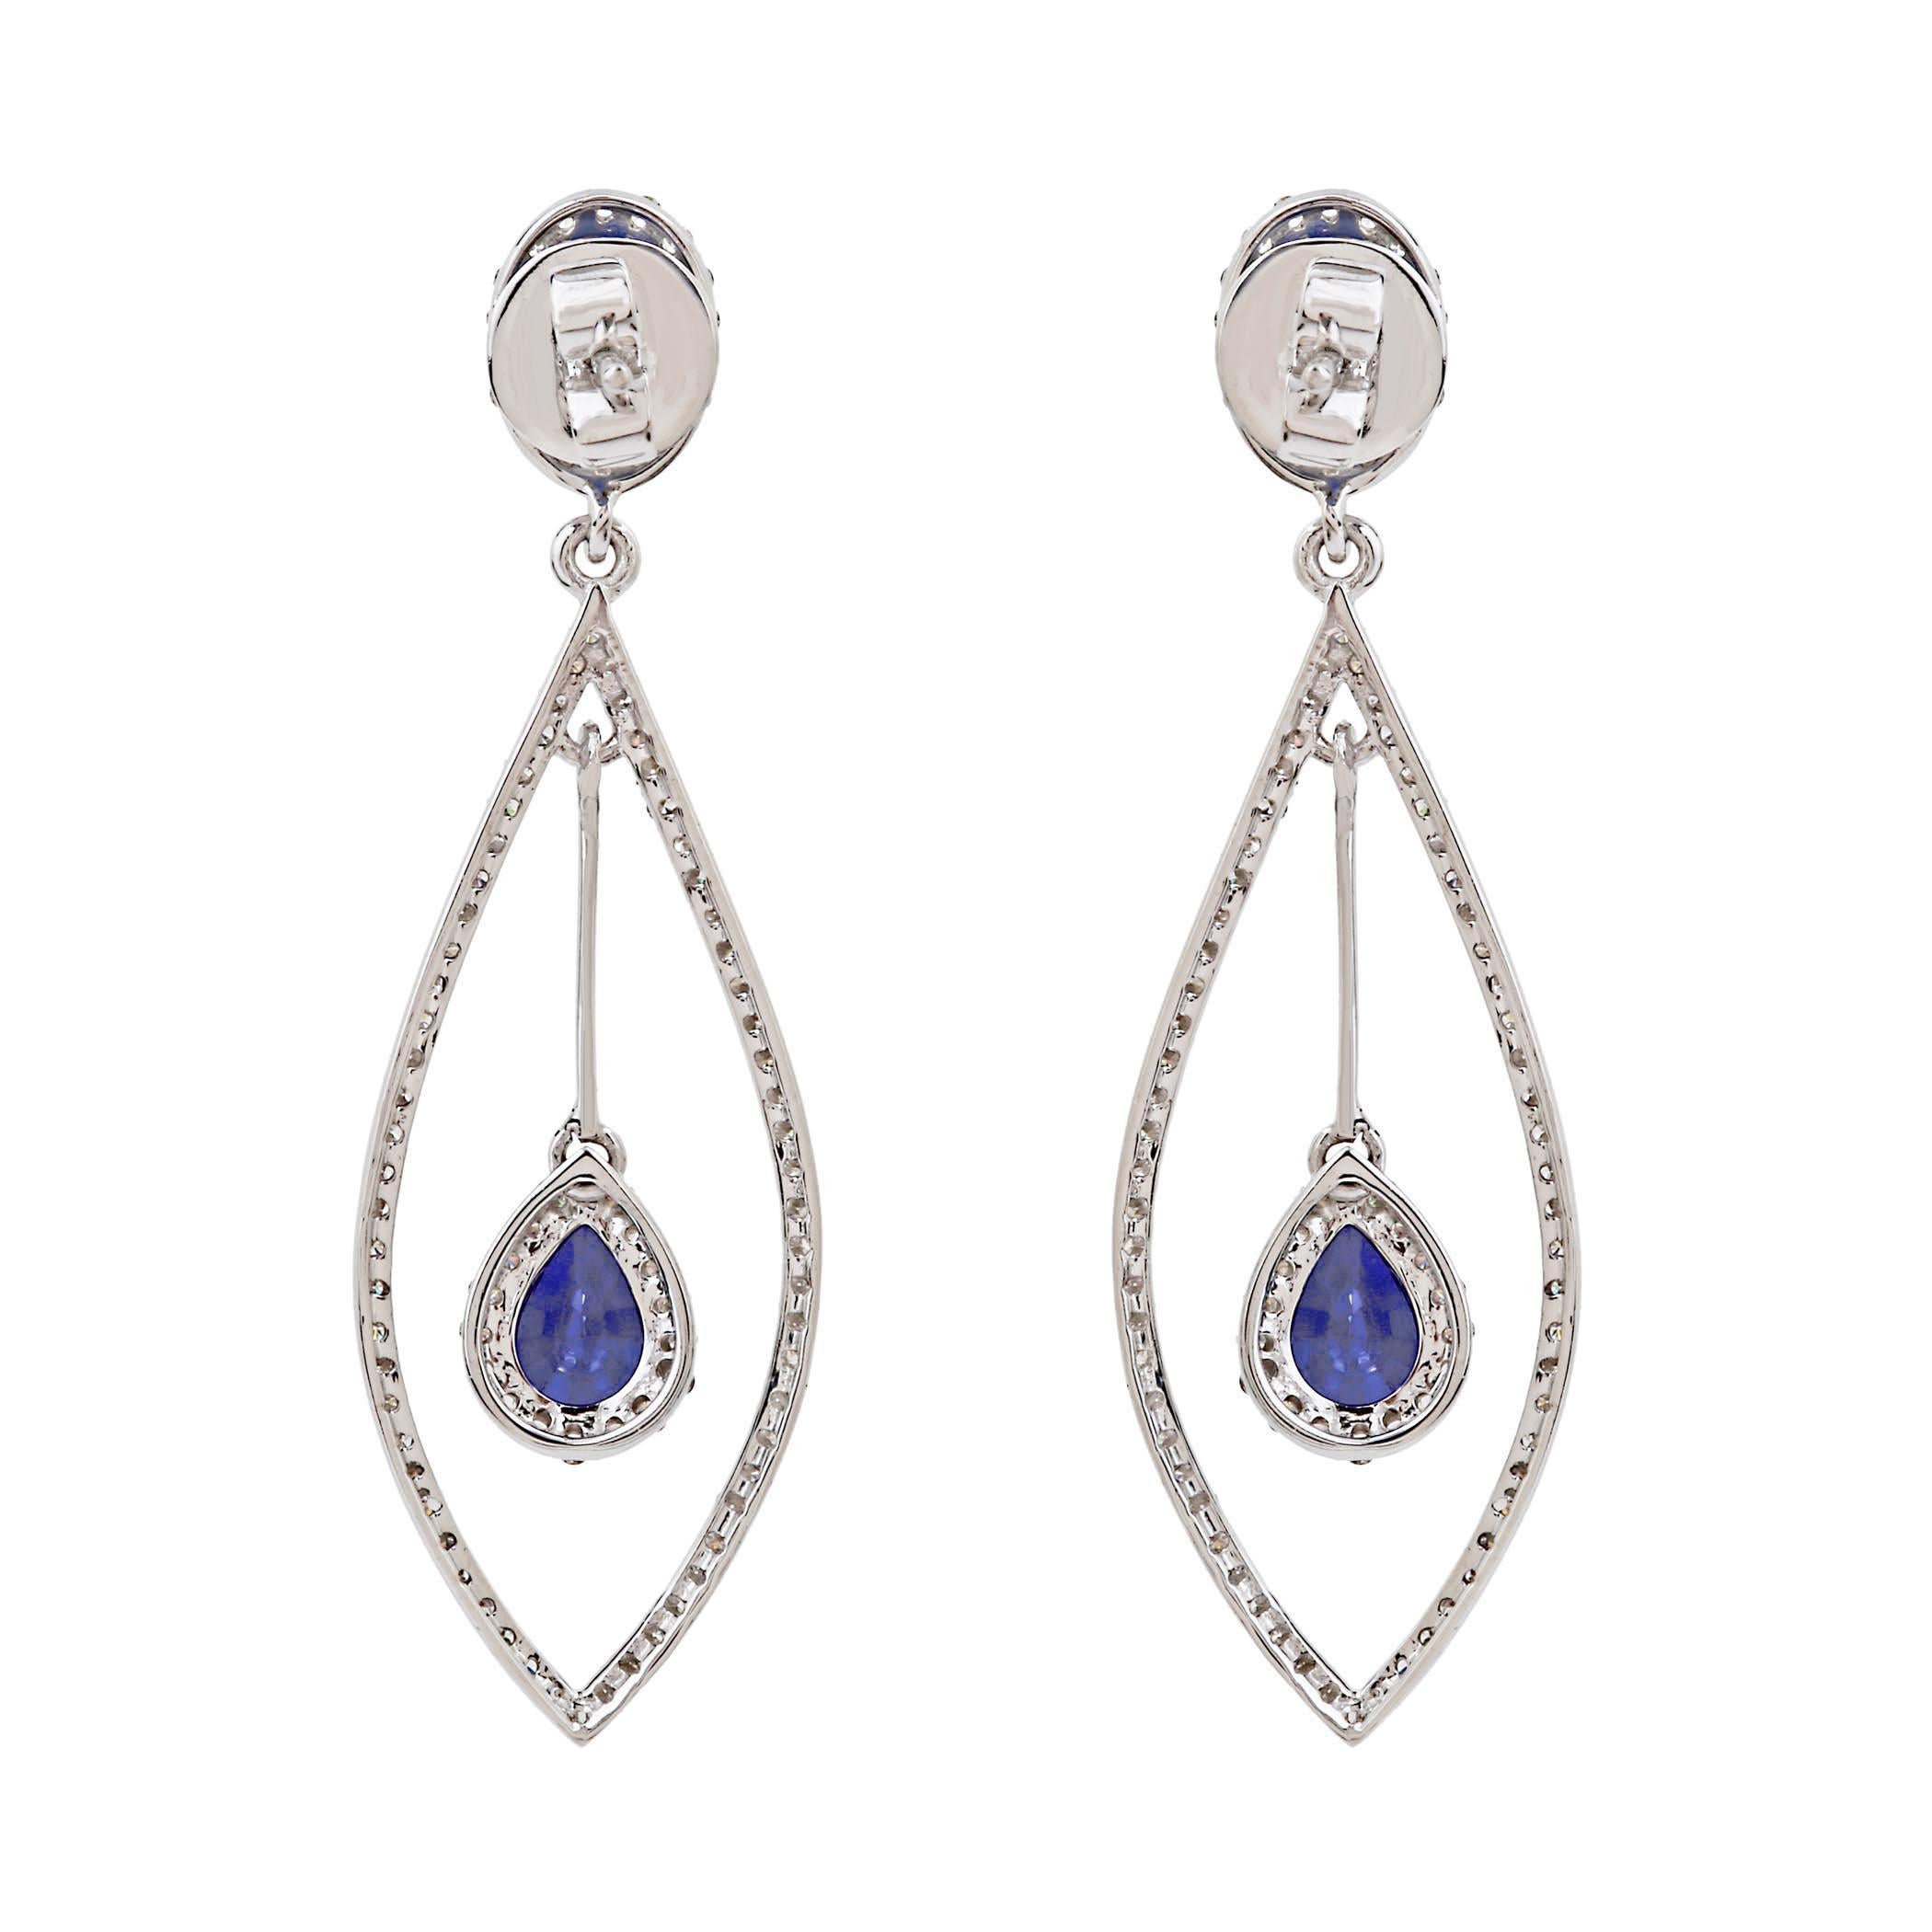 Get ready to spellbind in these exceptionally beautiful dangle earrings. Expertly crafted with sapphire and diamonds, this timeless design is set in 18K white gold. The brilliant blue hue will add vibrant color to any